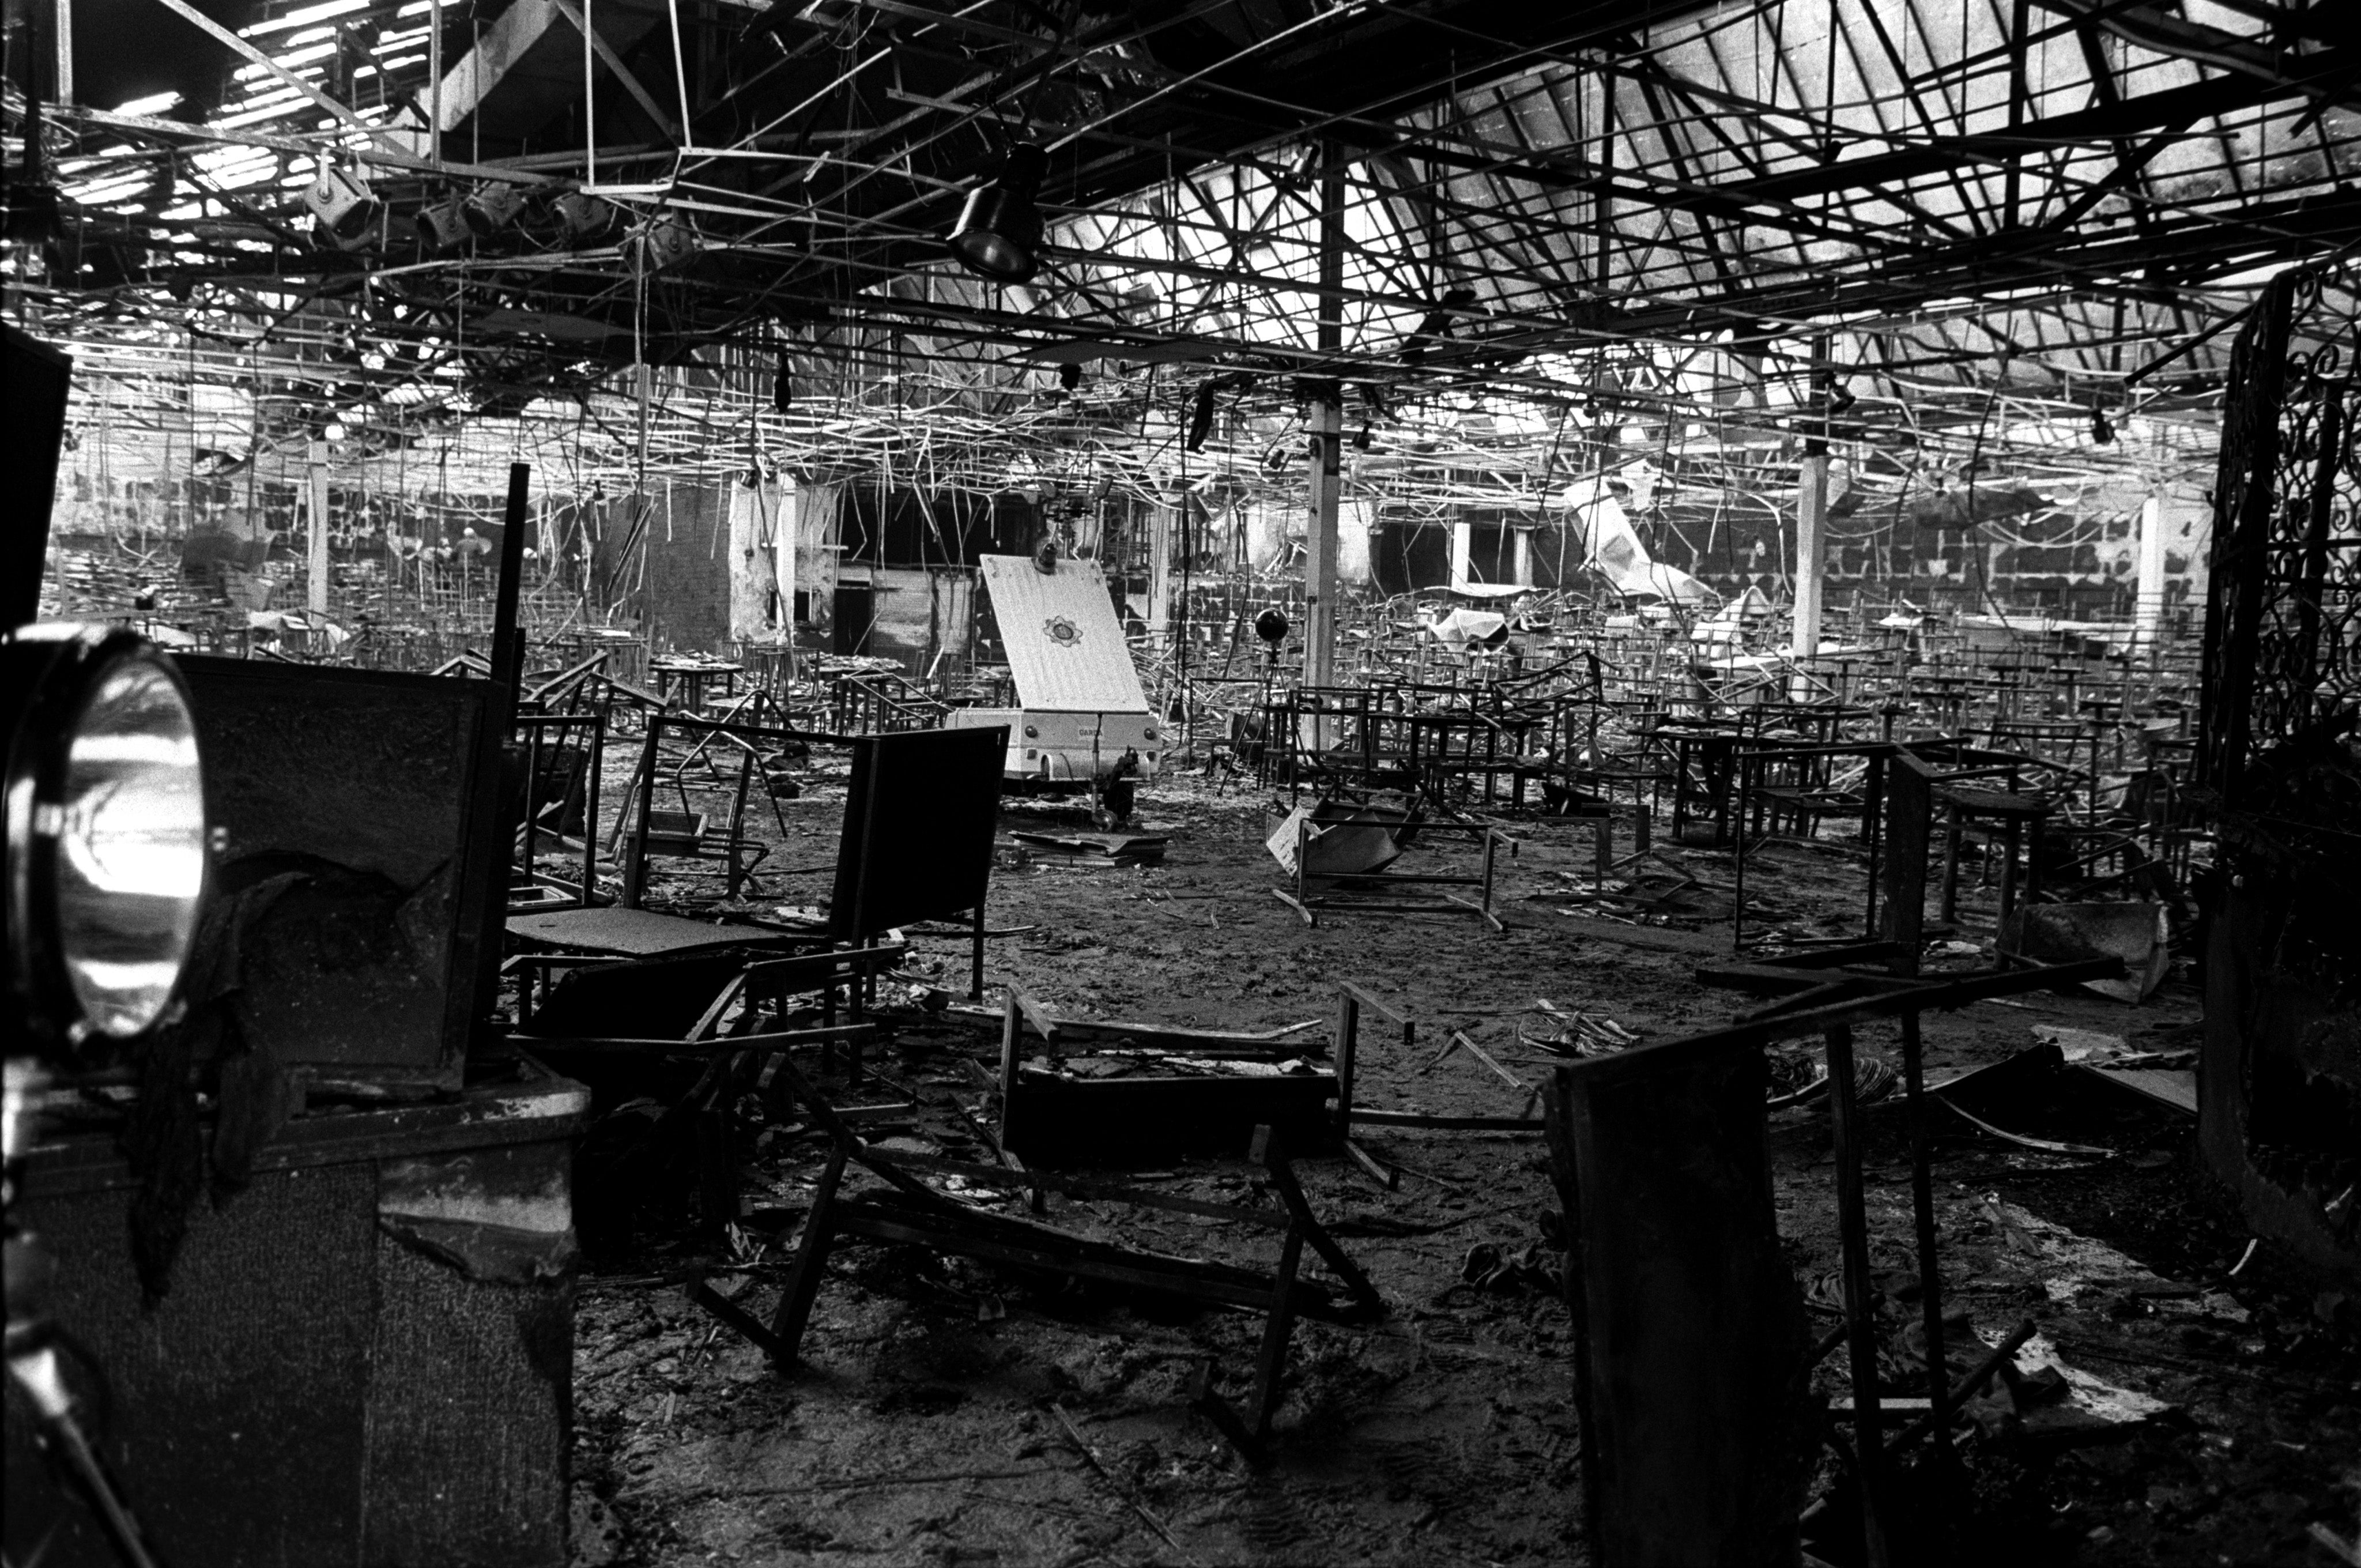 Damage after the 1981 fire at the Stardust nightclub in Dublin